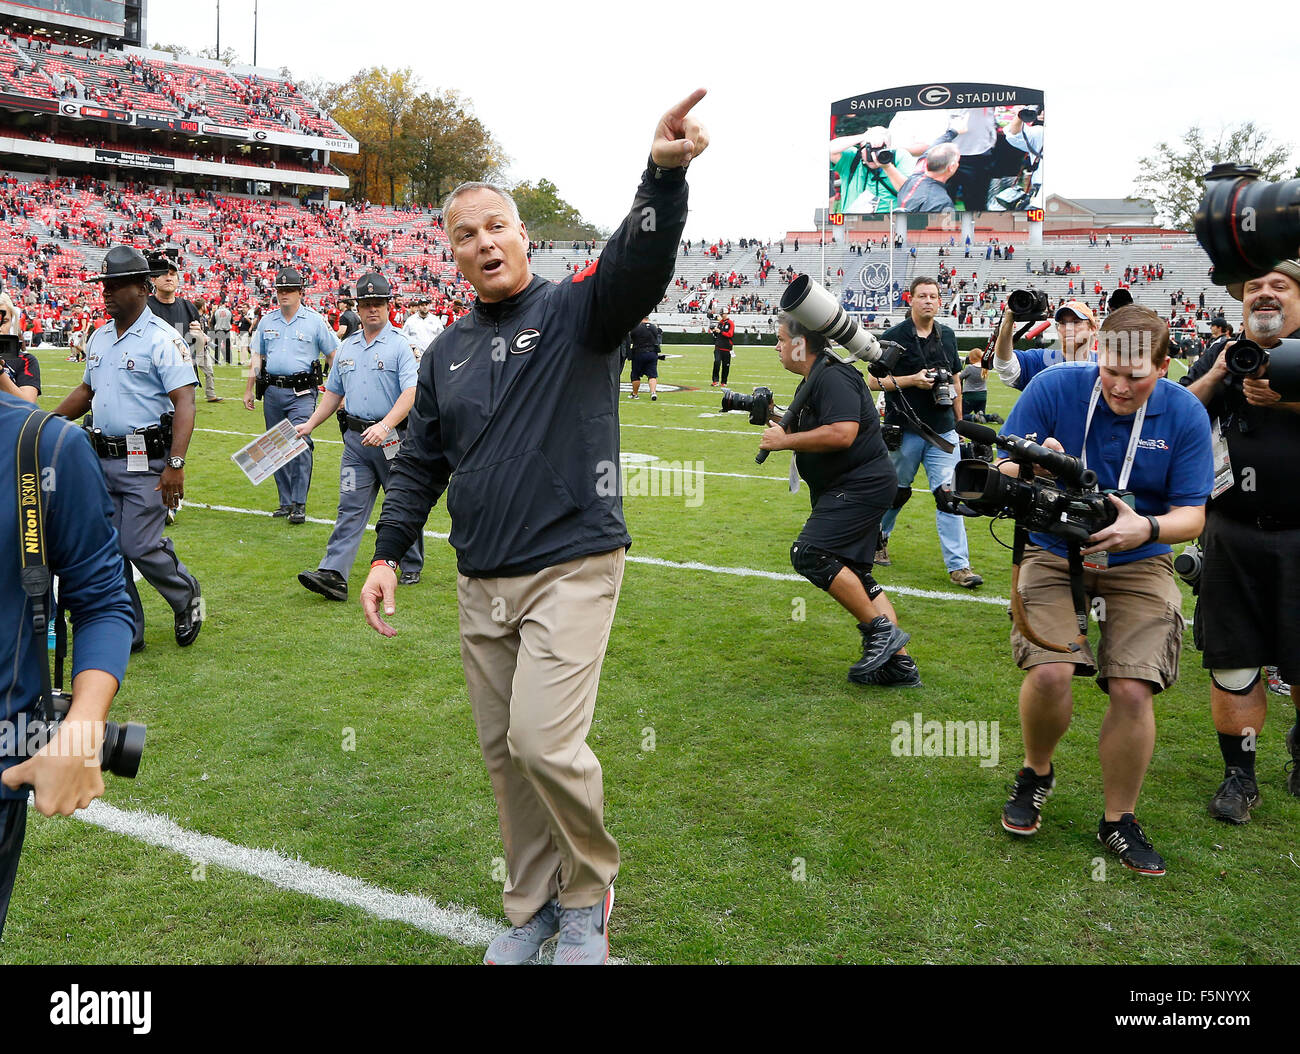 Nov. 7, 2015 - Athens, GA, USA - Georgia Bulldogs head coach Mark Richt  congratulated his fans after Georgia defeated the University of Kentucky  in Sanford Stadium in Athens, GA., Saturday, November 7, 2015. This is fourth quarter college football action. Georgia won 27-3. Photo by Charles Bertram | Staff. (Credit Image: © Lexington Herald-Leader via ZUMA Wire) Stock Photo